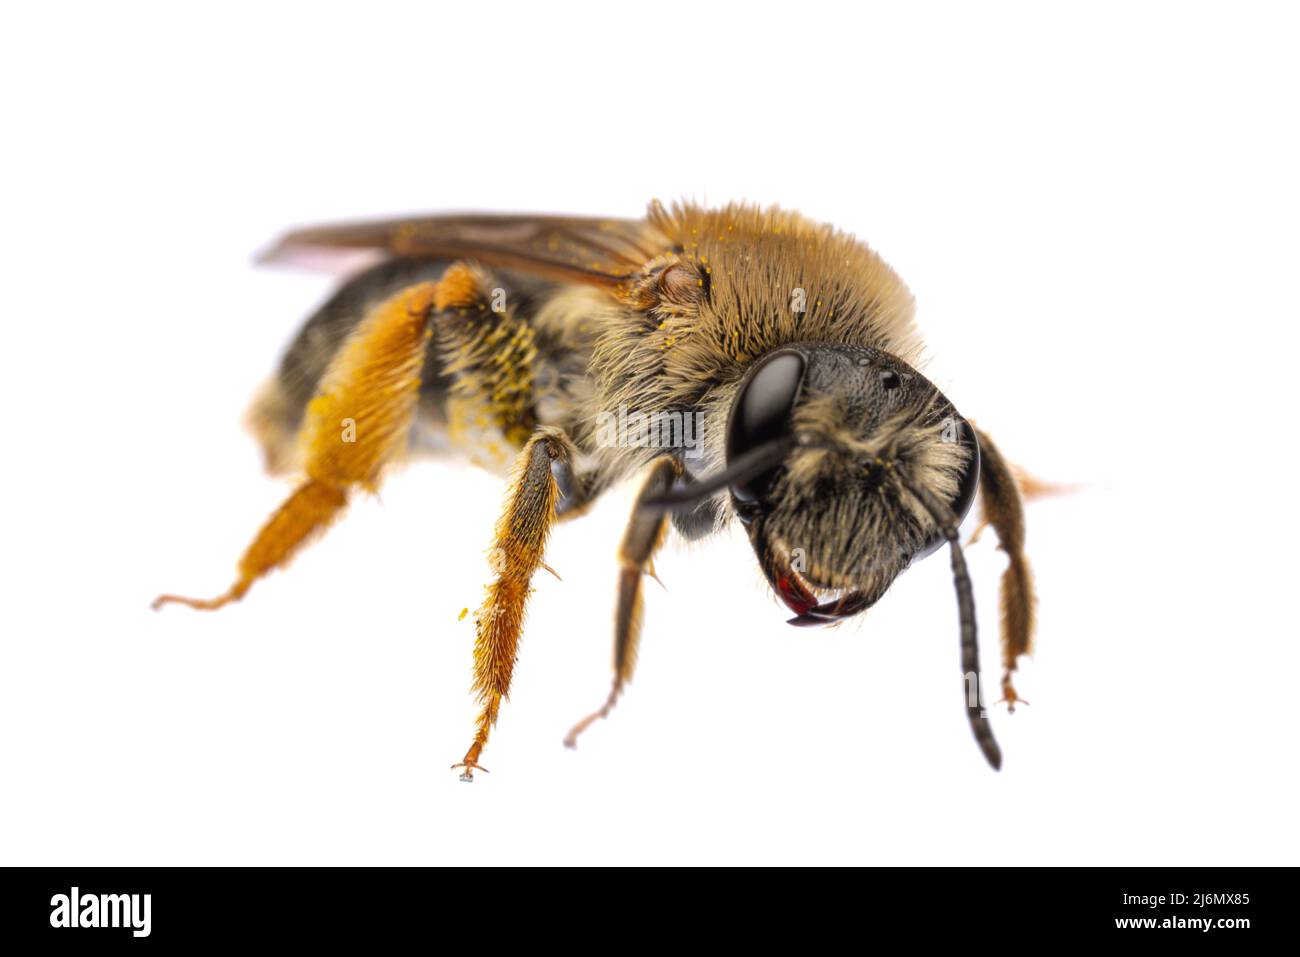 insects of europe - bees: front view macro of female Andrena haemorrhoa (german Rotschopfige Sandbiene)  isolated on white background looking at the c Stock Photo